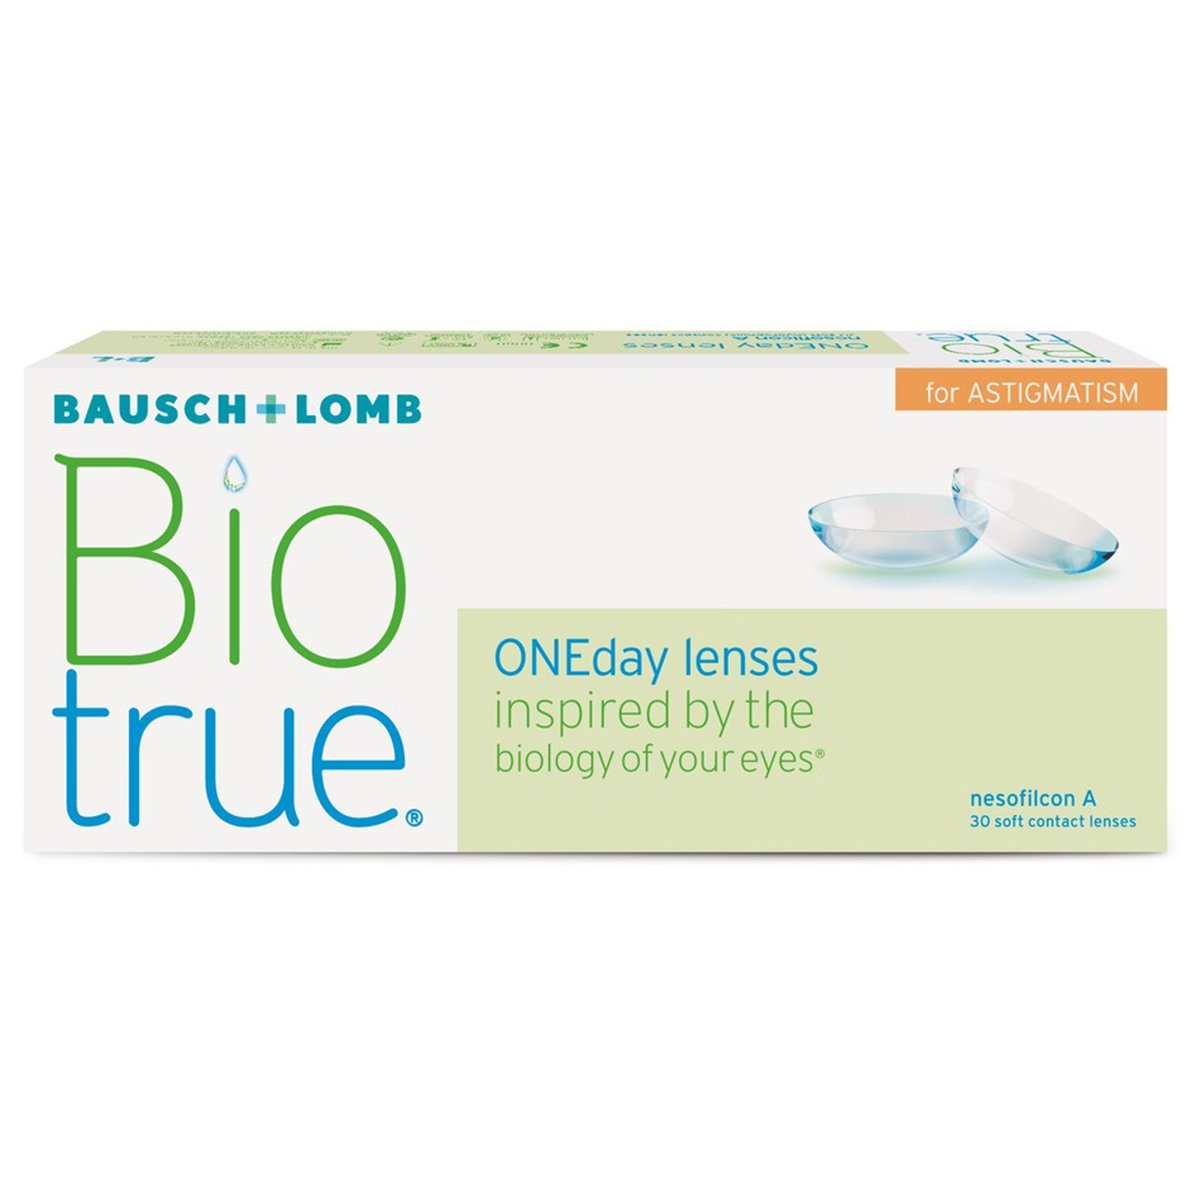 Bausch And Lomb Bio True One day For Astigmatism - woweye